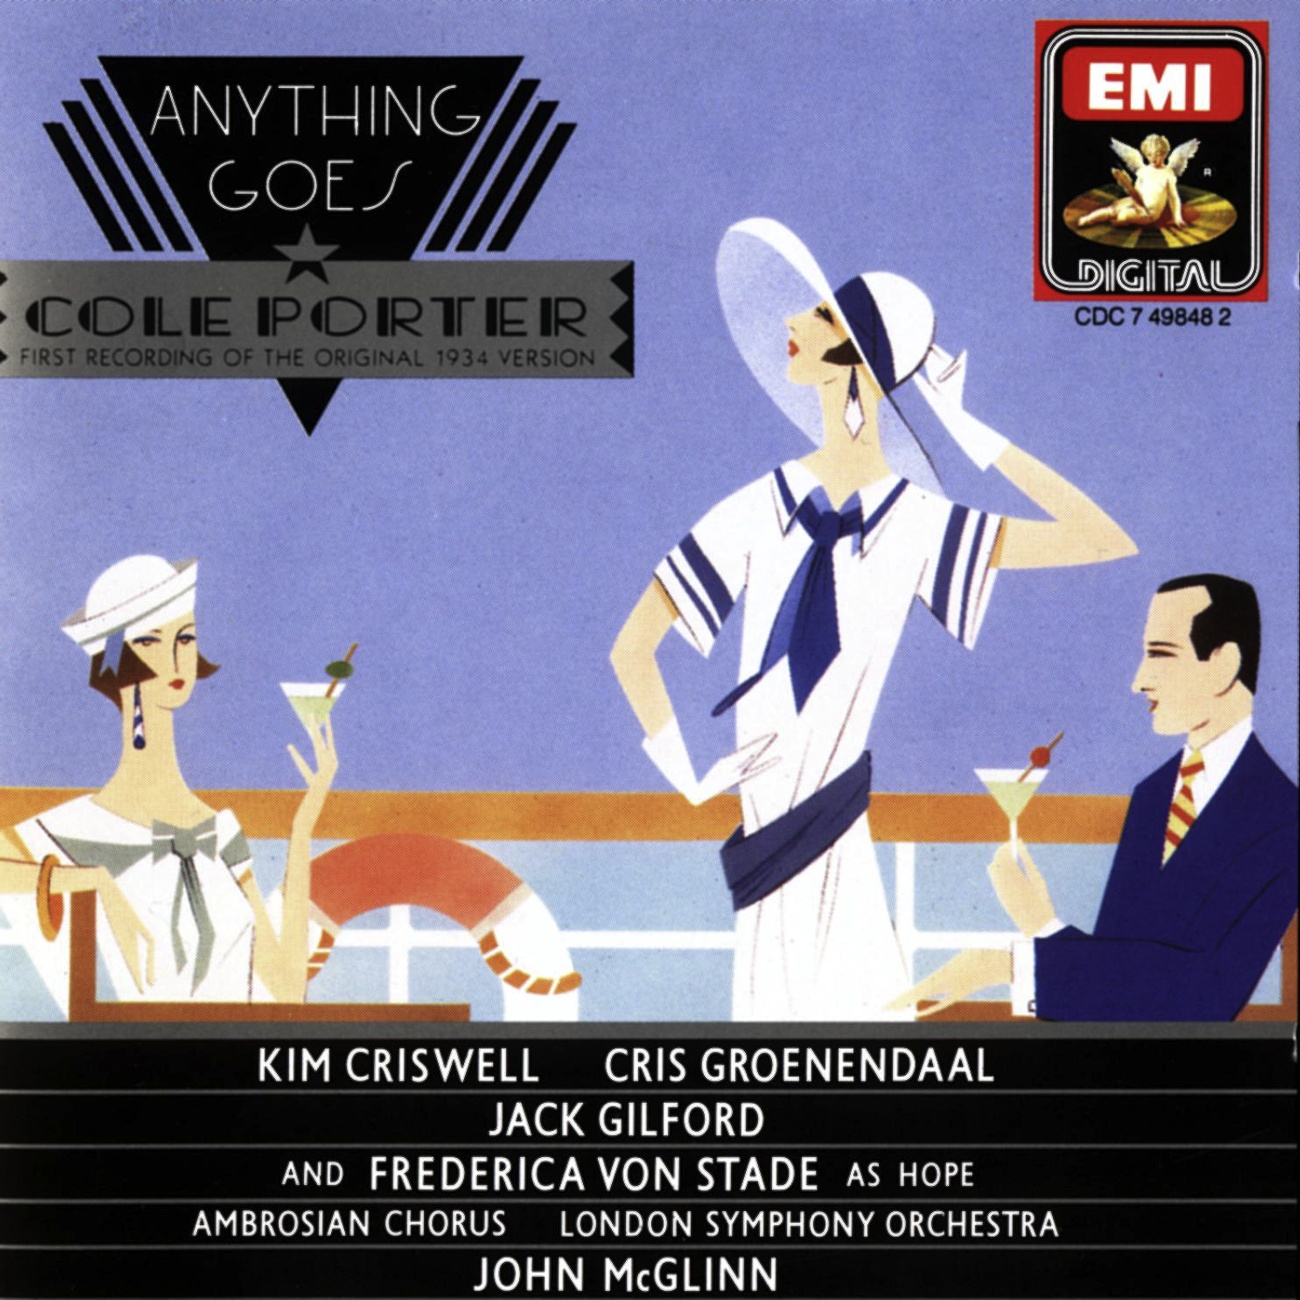 Anything Goes (original 1934 version), Act I: Reprise: There'll always be a lady fair (Four Sailors)